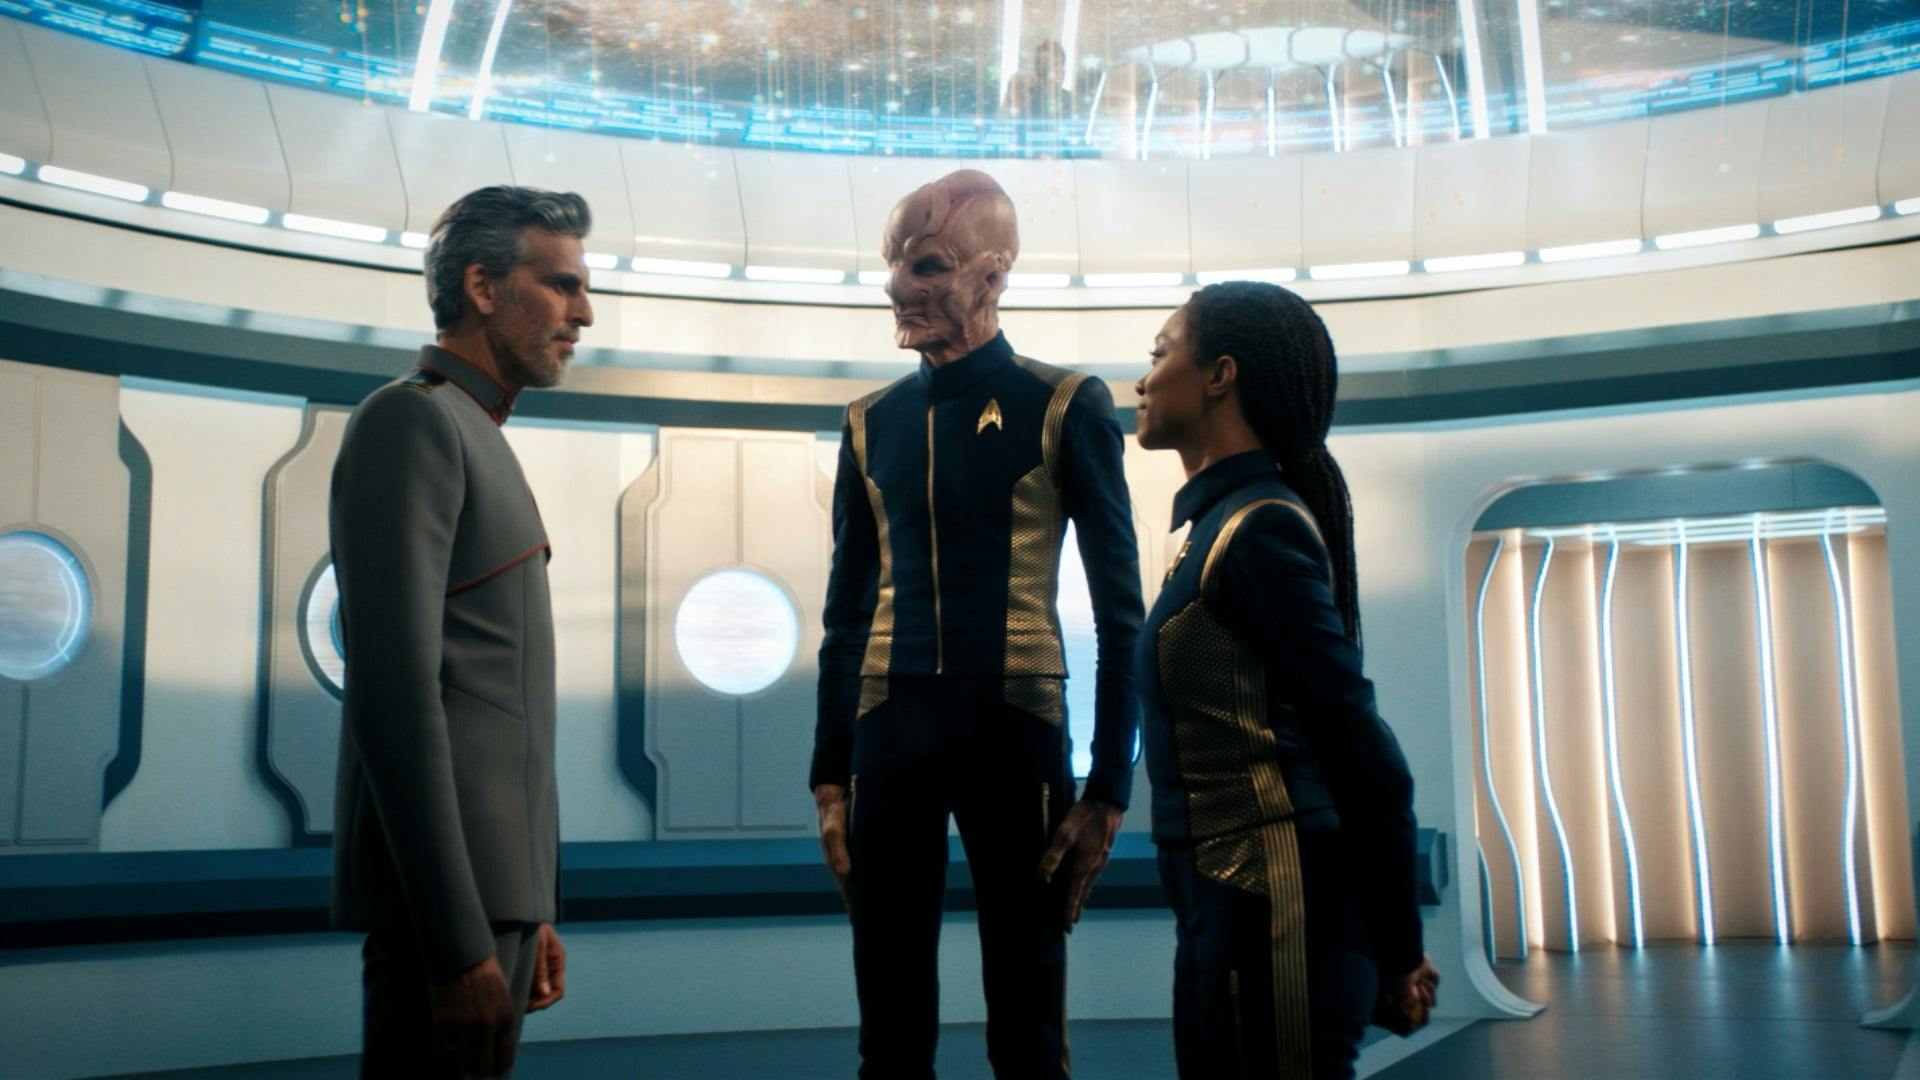 Moments of Star Trek: Discovery